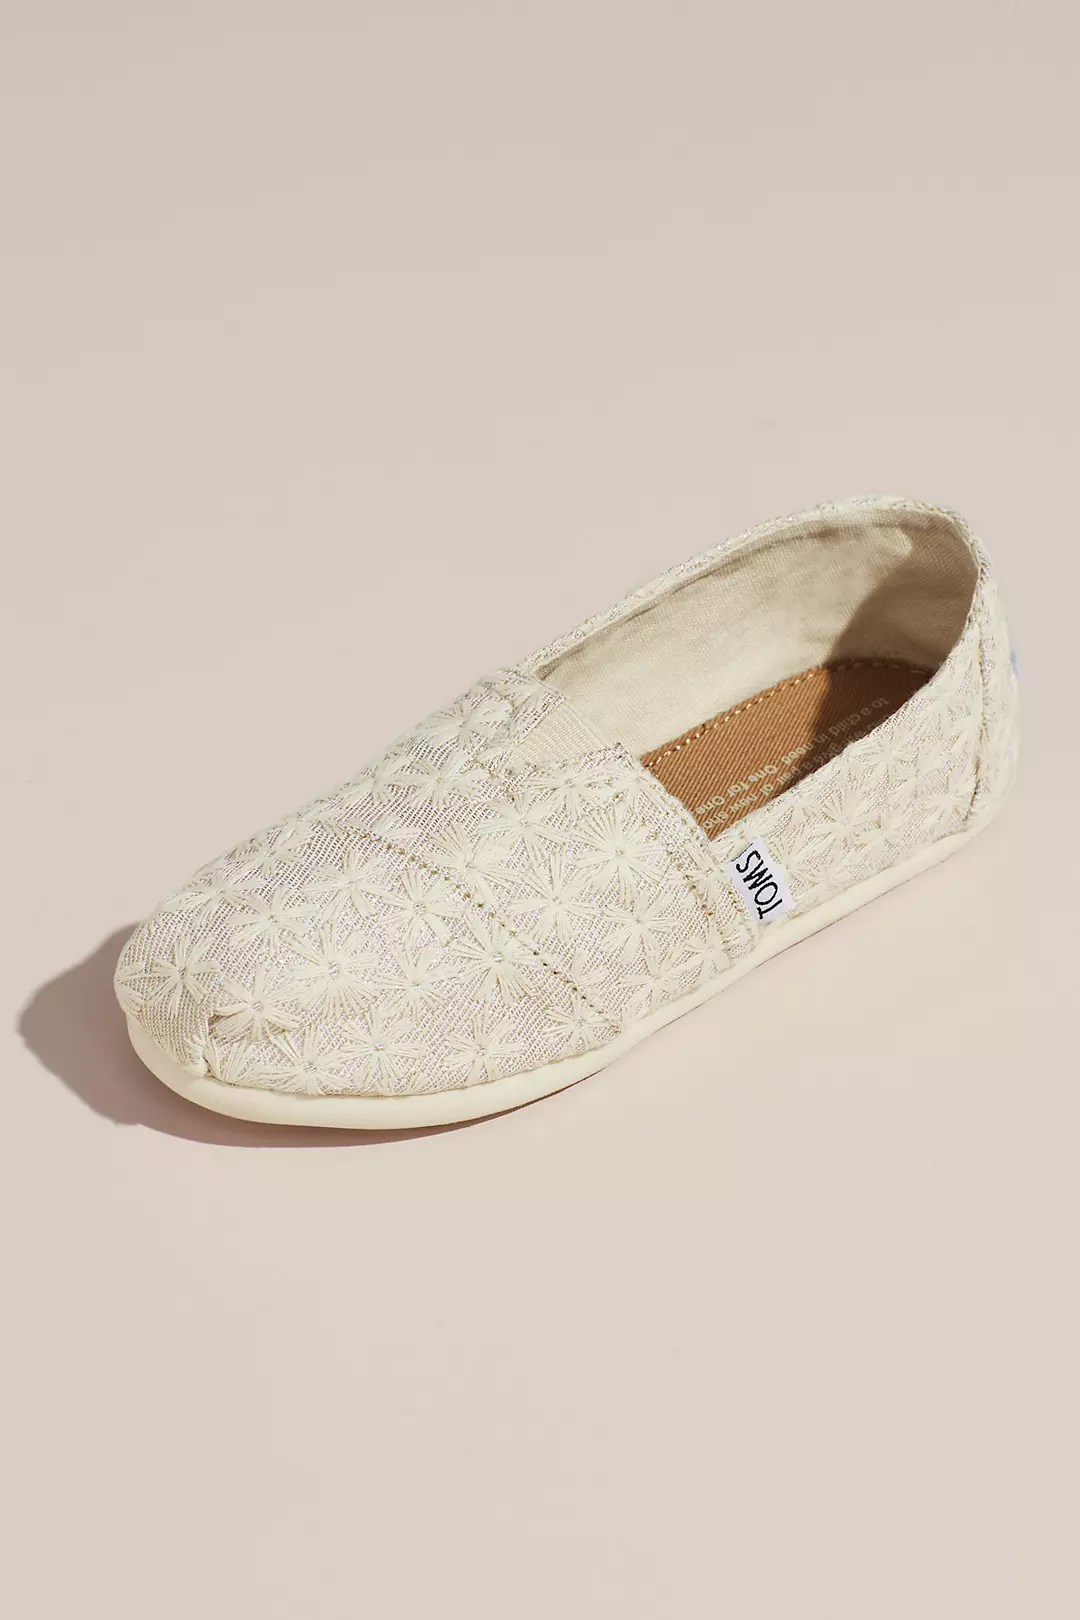 TOMS Embroidered Floral Slip-On Shoes Image